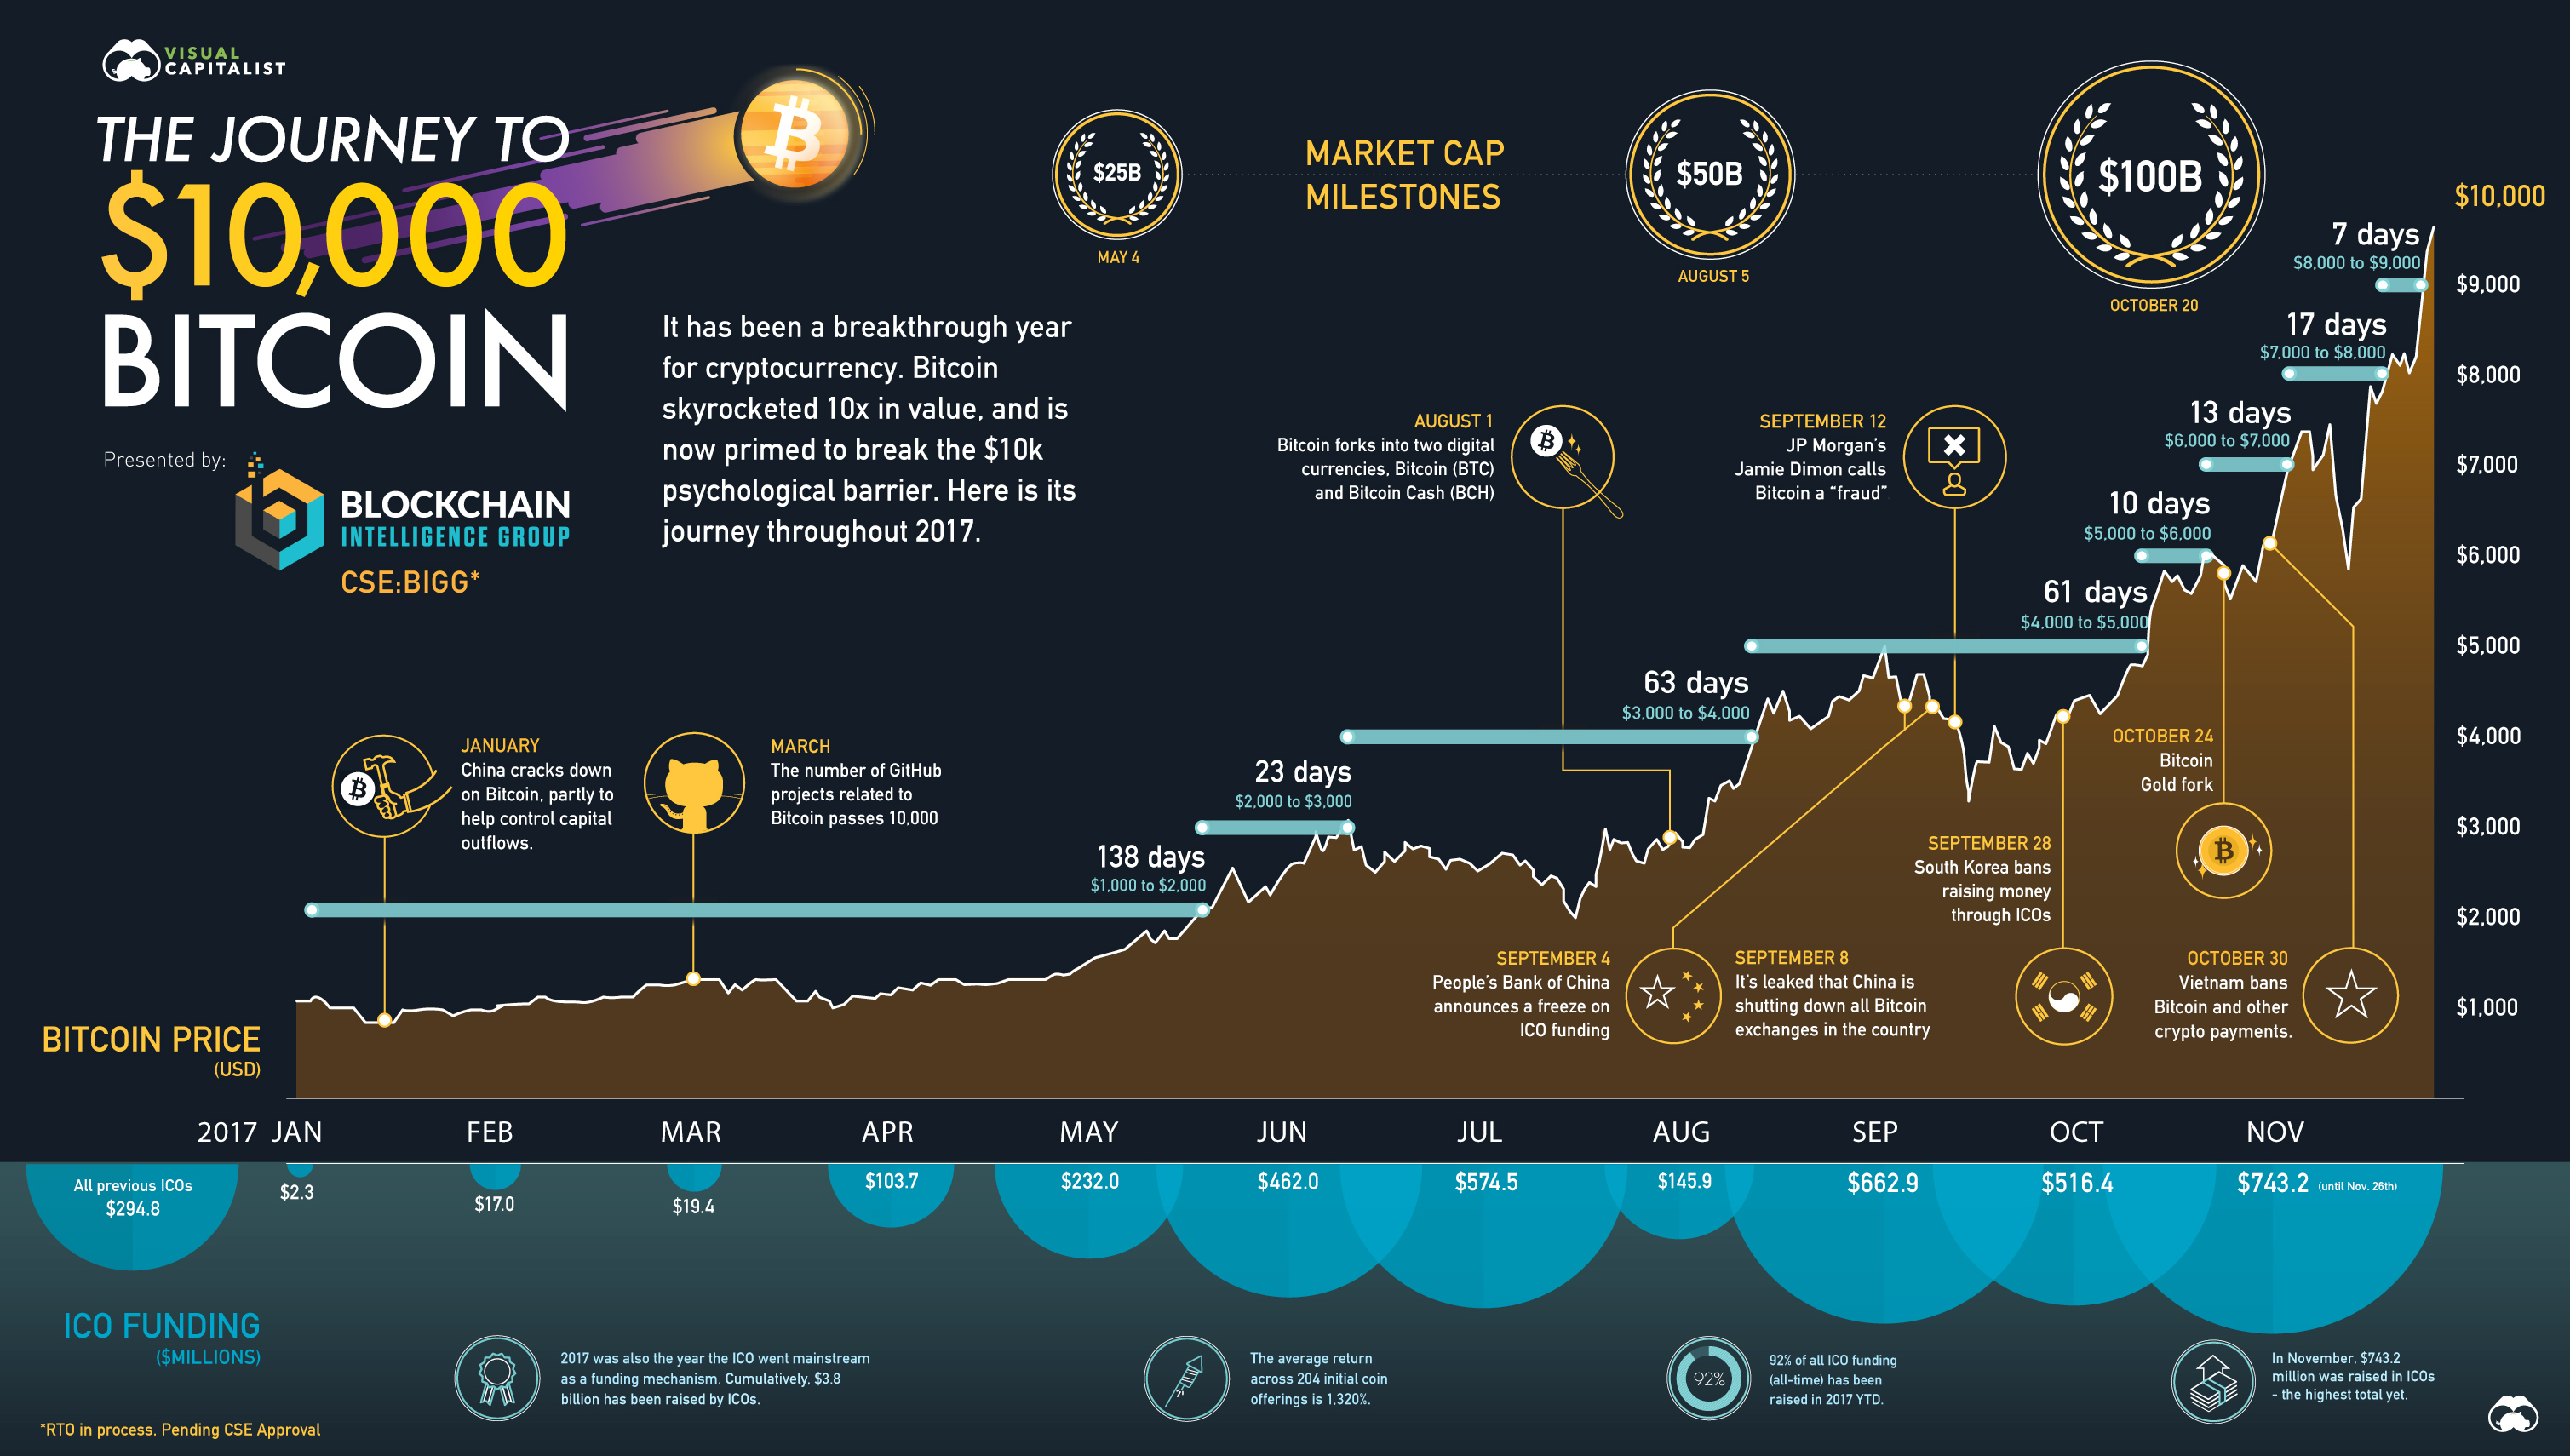 Visualizing the Journey to $10,000 Bitcoin